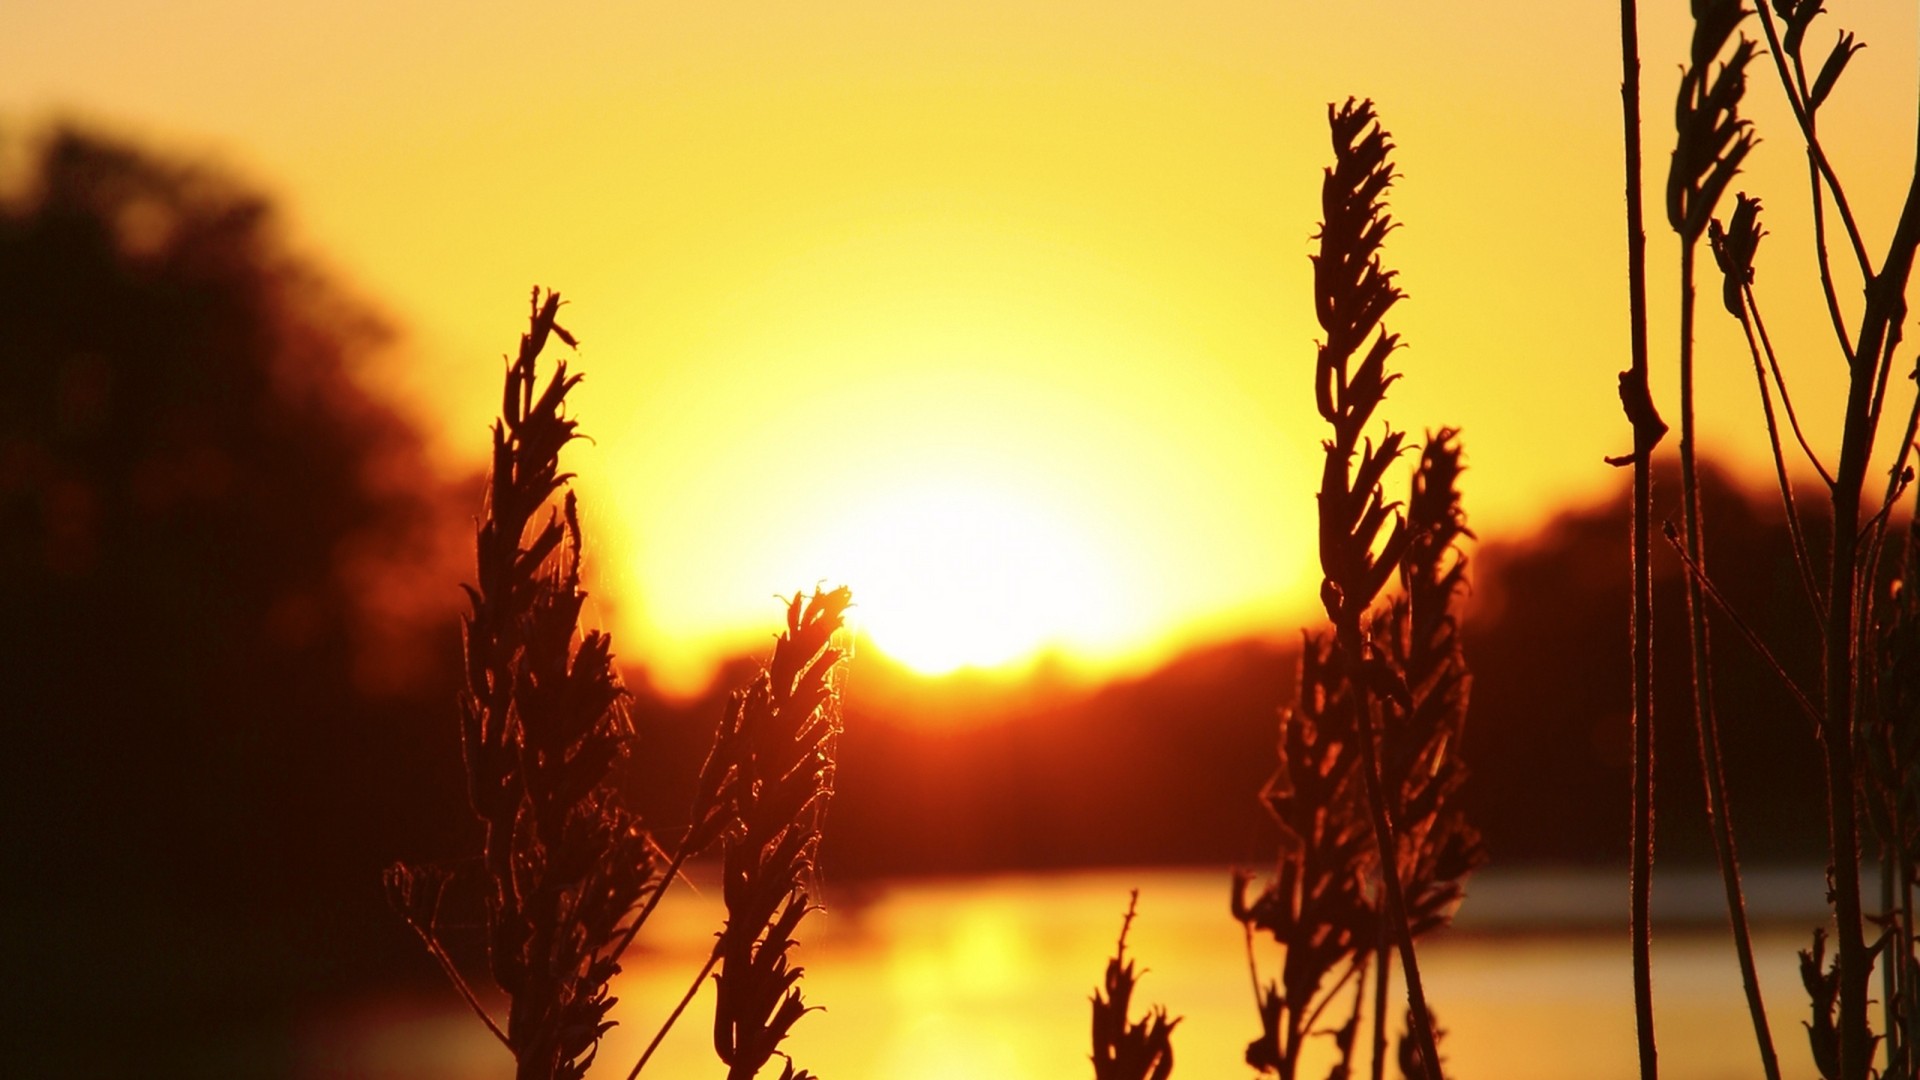 General 1920x1080 sunlight silhouette plants nature spikelets sunset